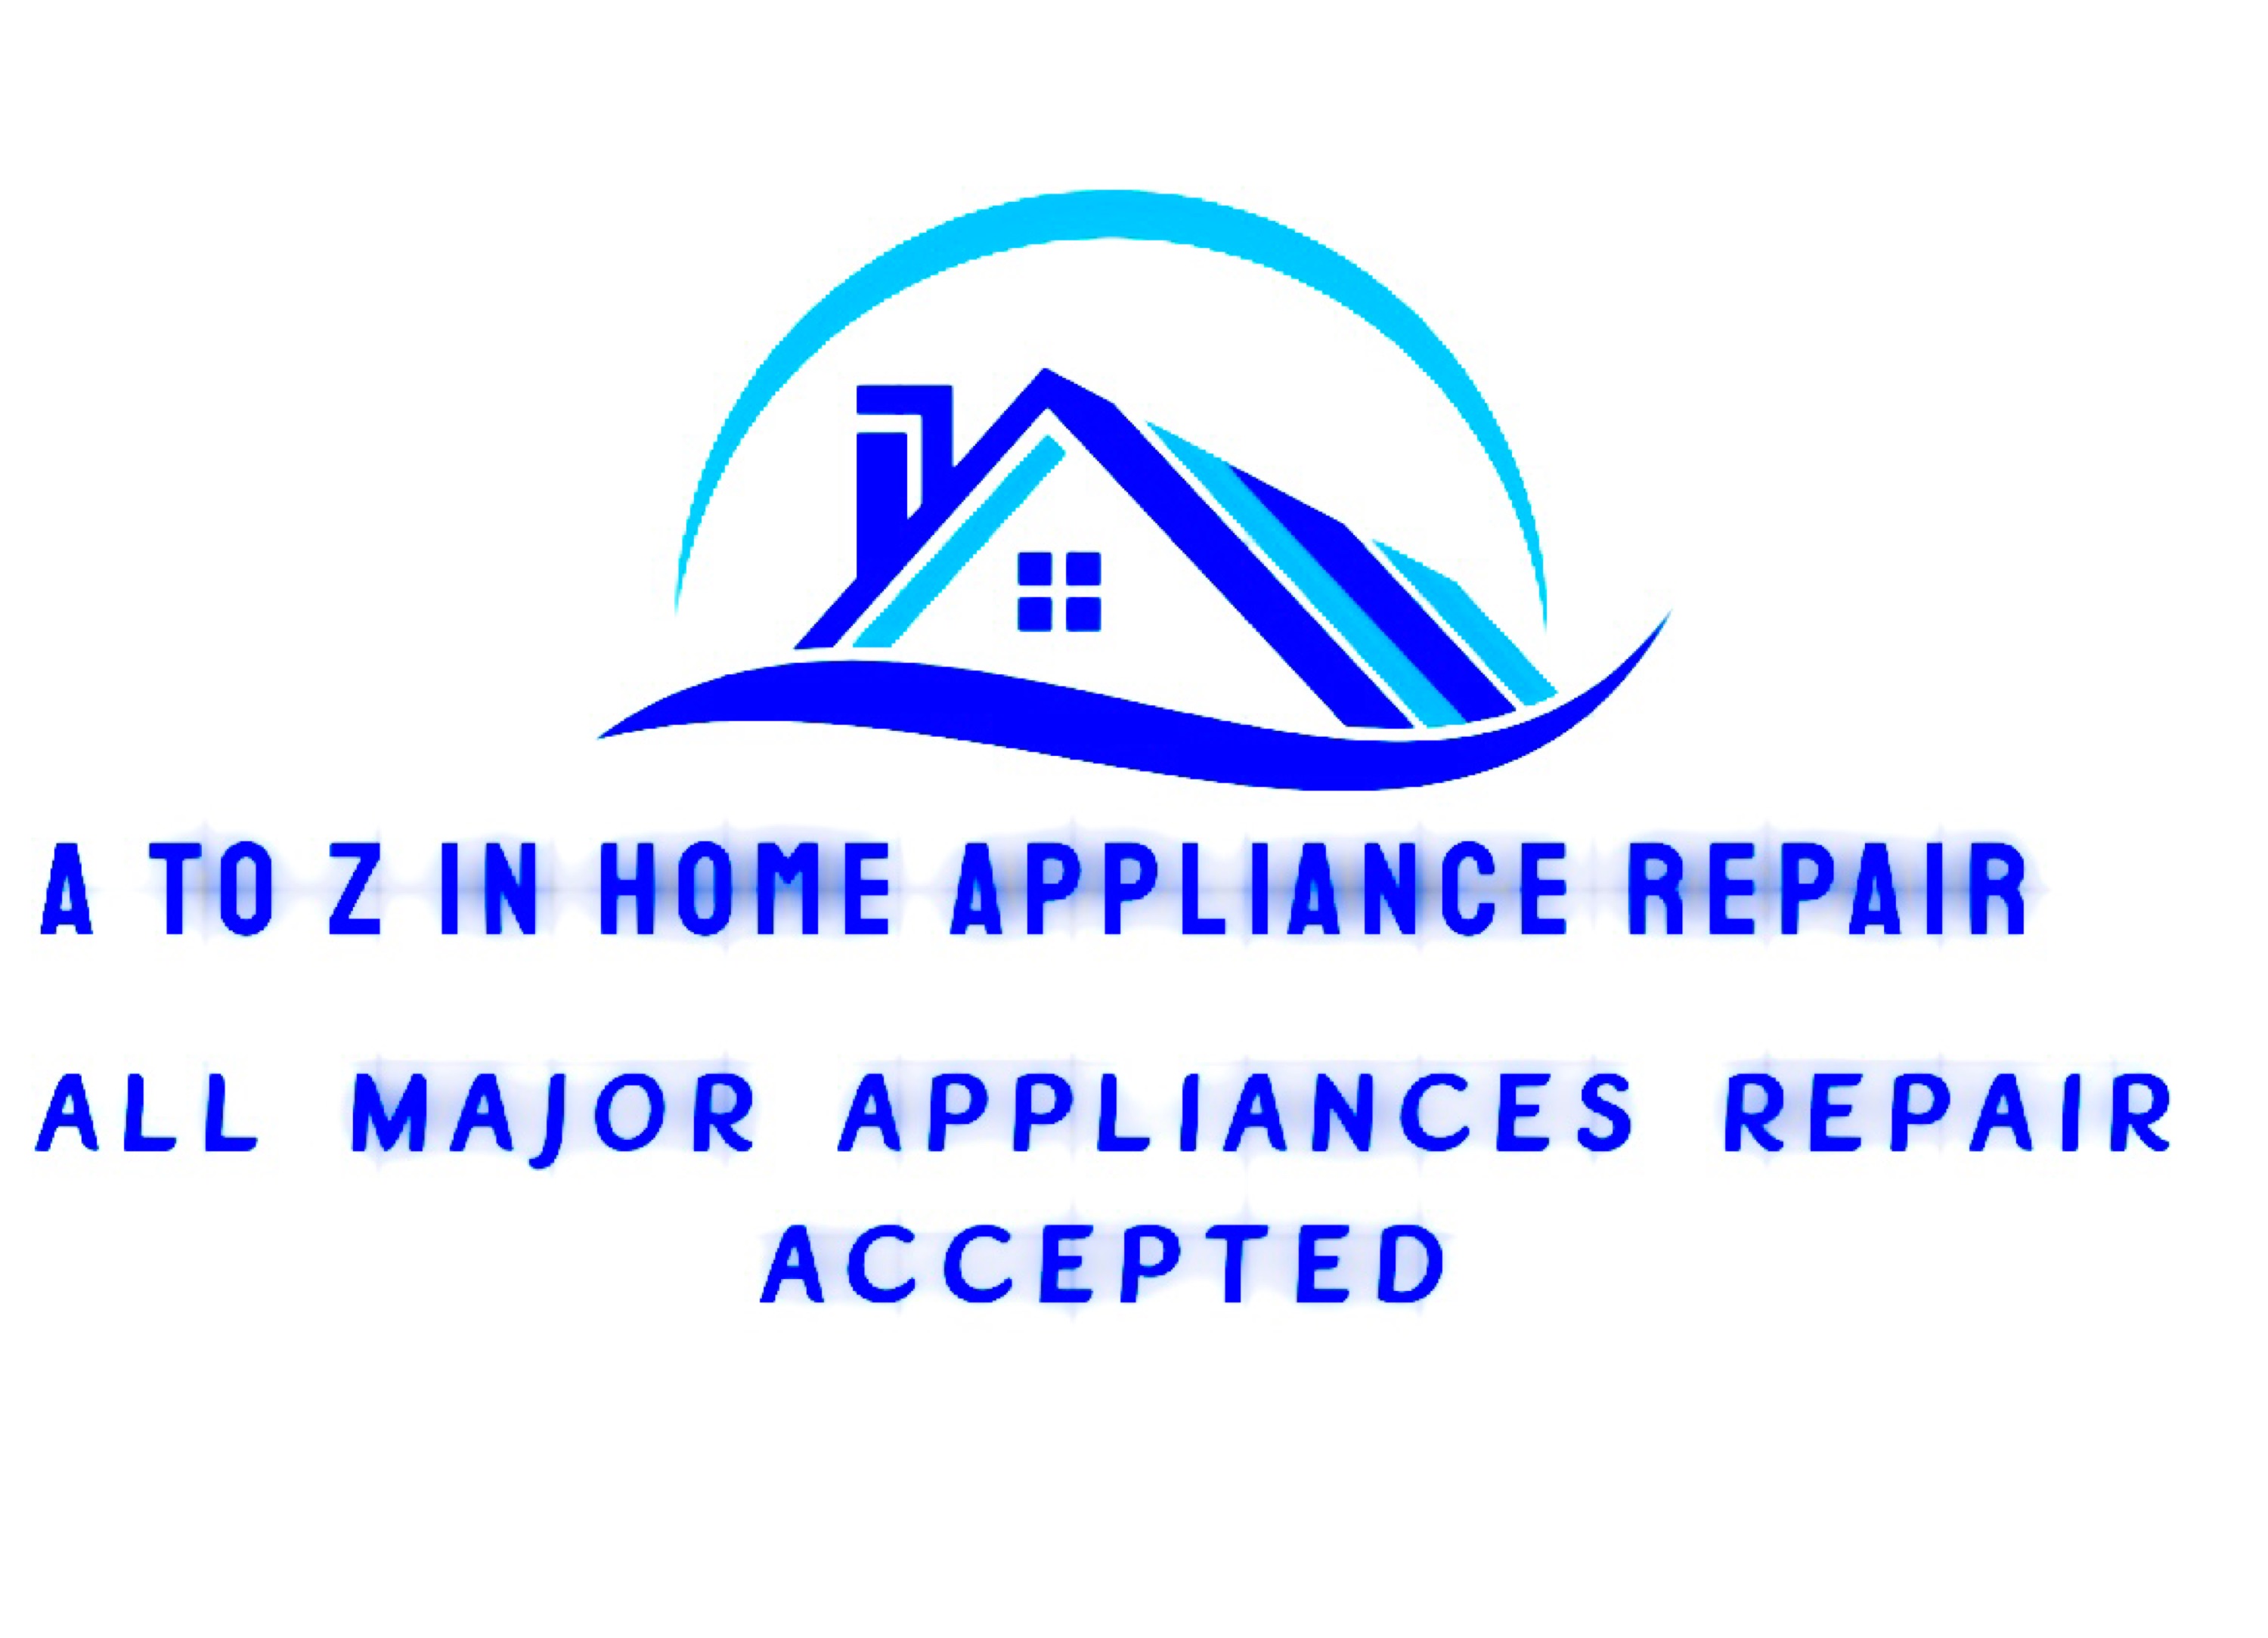 A to Z In Home Appliance Repair Logo